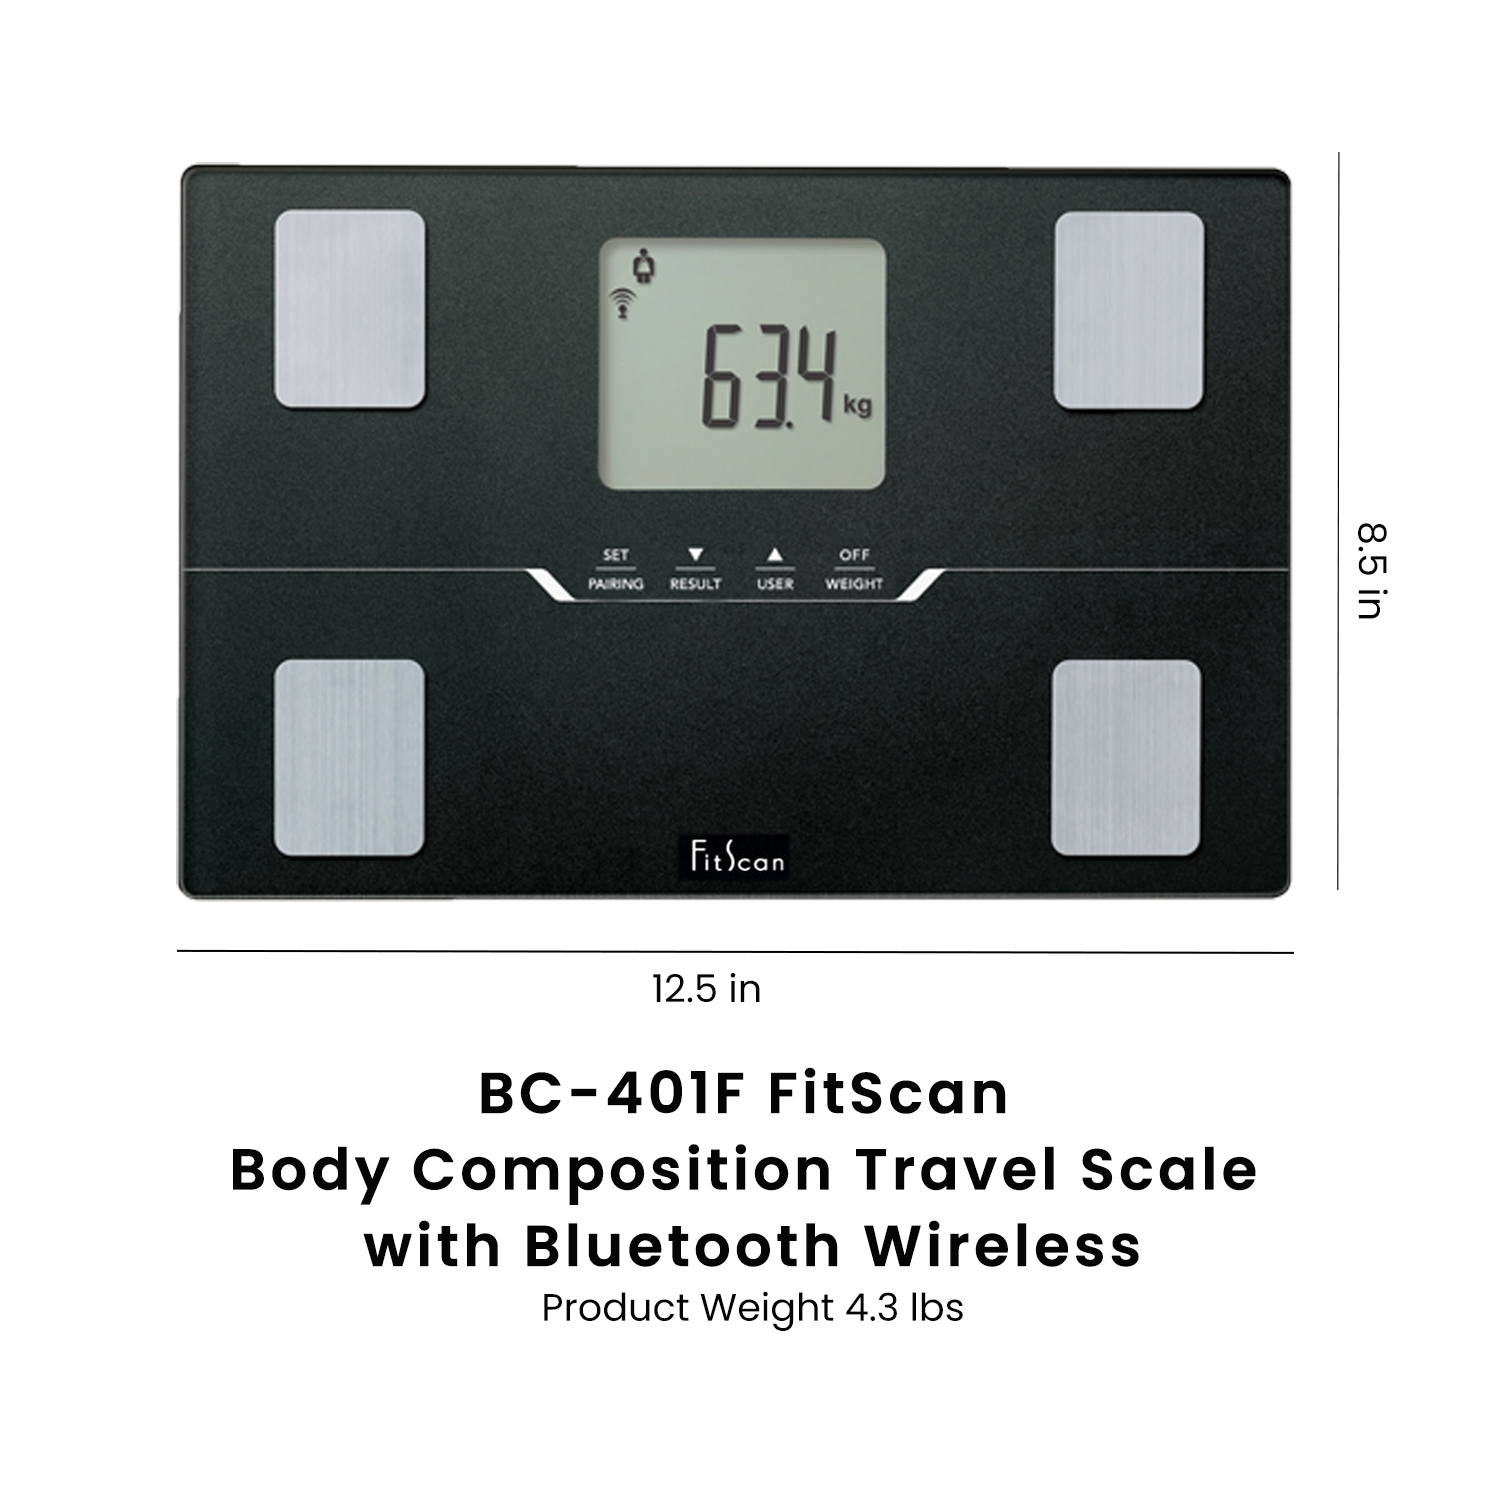 Tanita Scale & Body Fat Monitor for Weight, Body Fat % Bathroom Scale